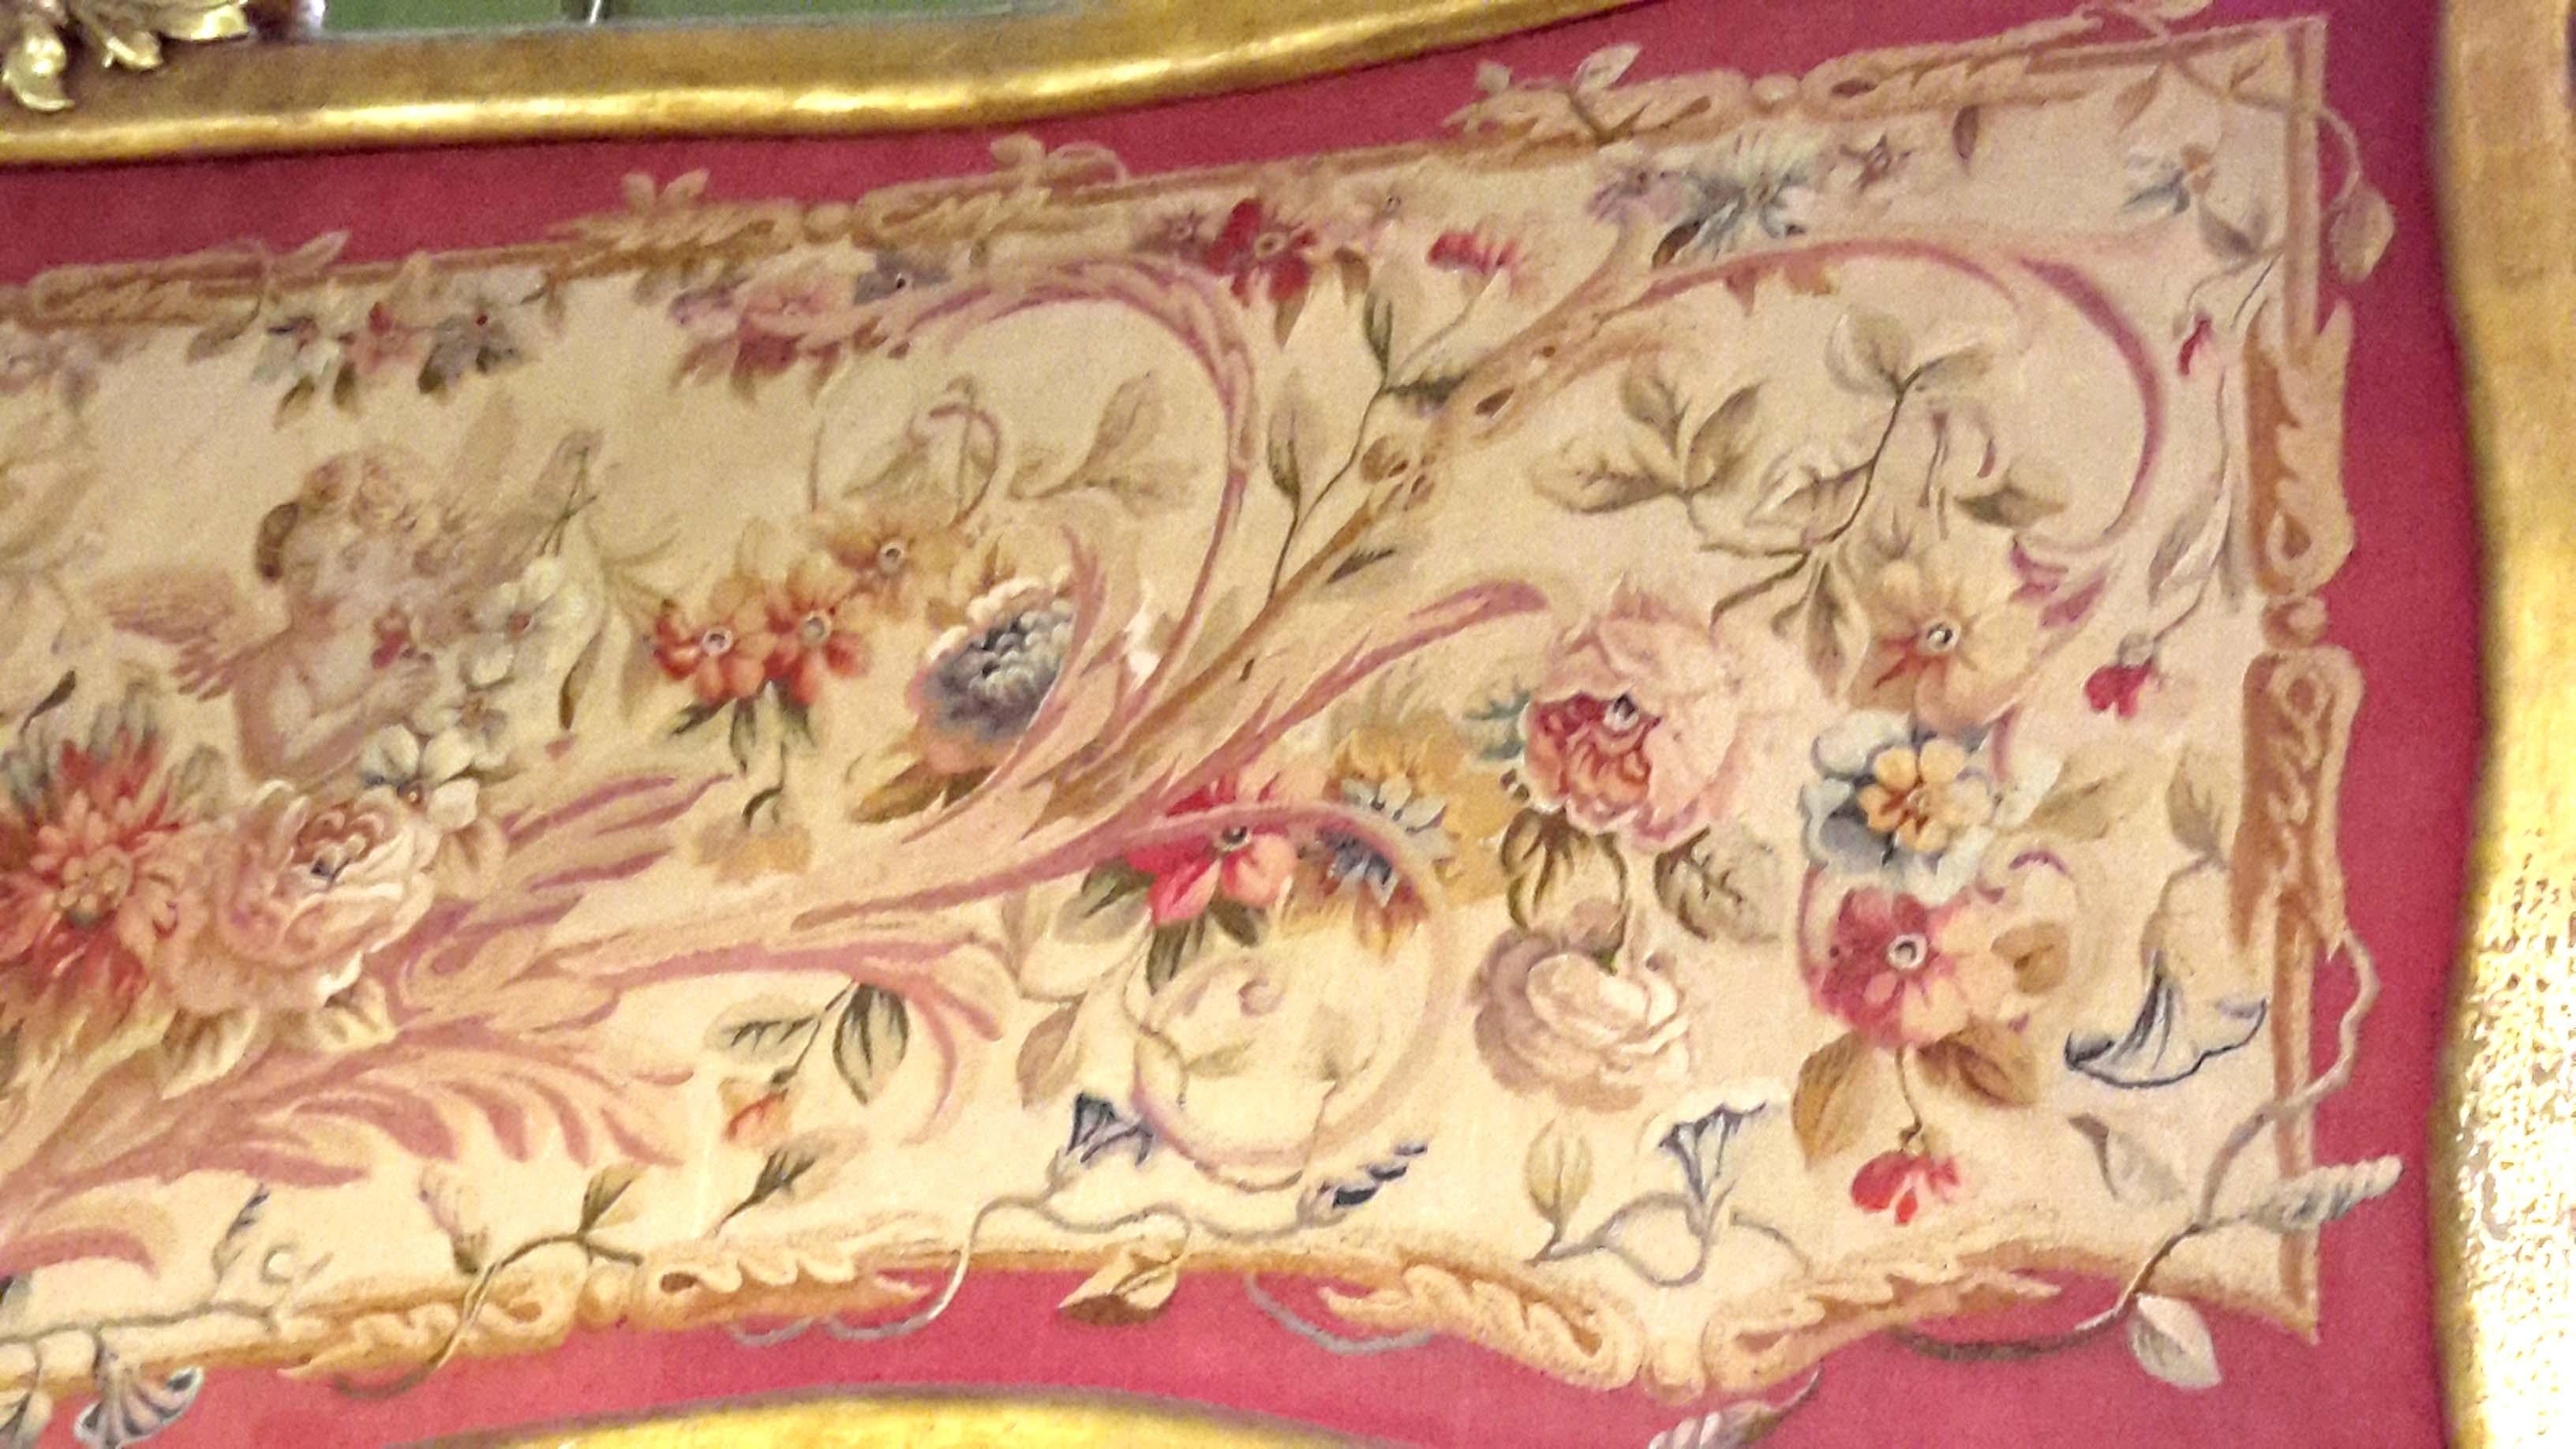 Louis XVI style handmade Aubusson tapestry panel in giltwood frame. Depicting garlands, flowers and cherubs. The colors are beautifully oxidized into a rich antique pinkish red and beige. Approximately 80 x 25 inches.